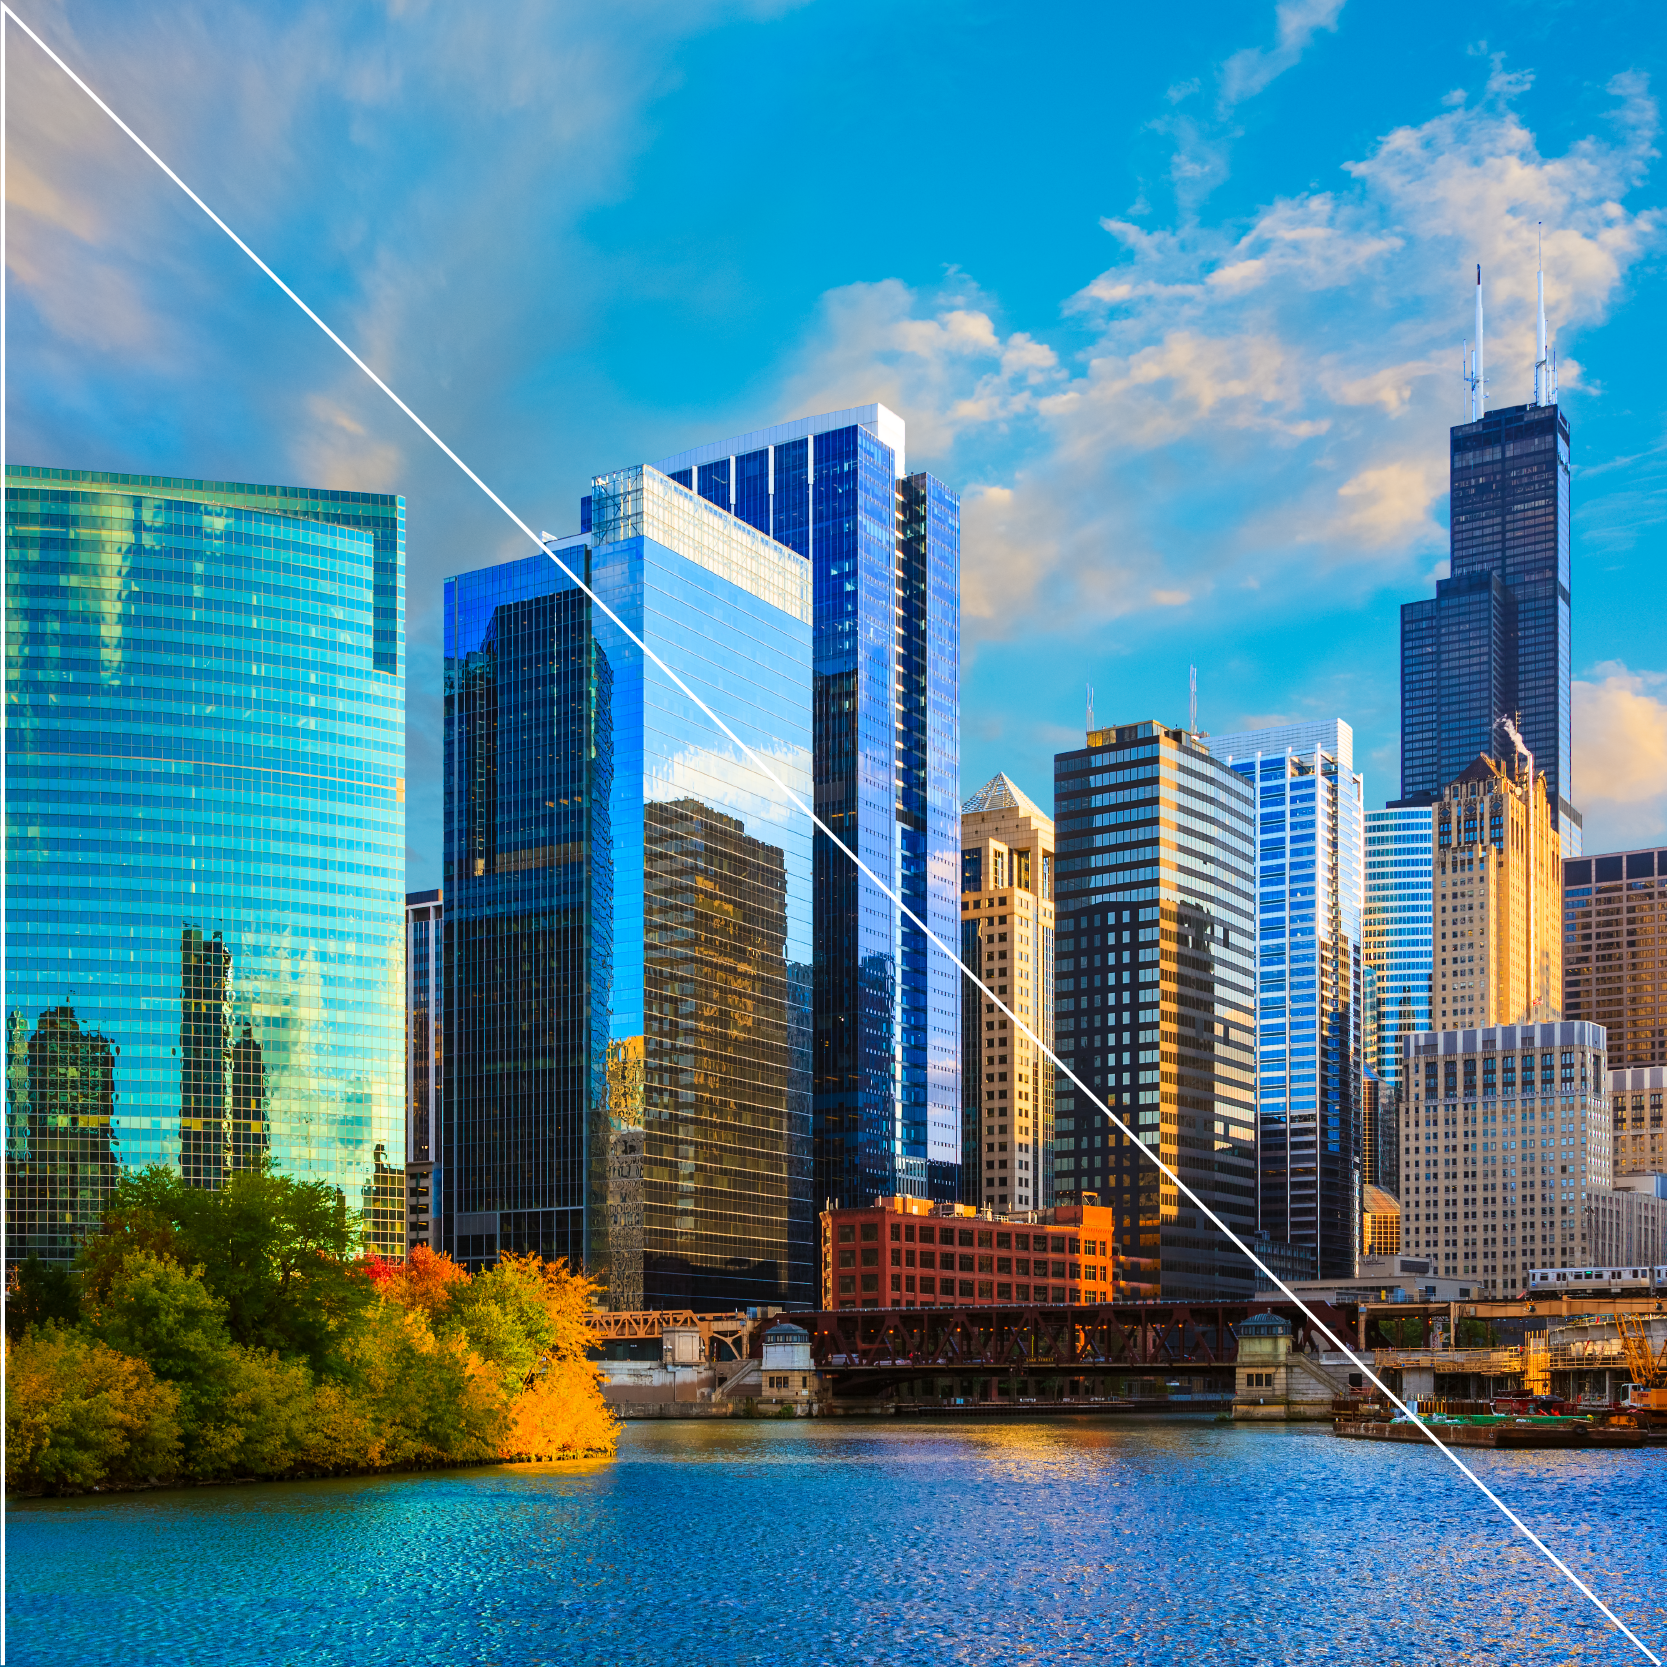 Chicago skyline with the river visible and a right angle white triangle across the image for stylistic impact